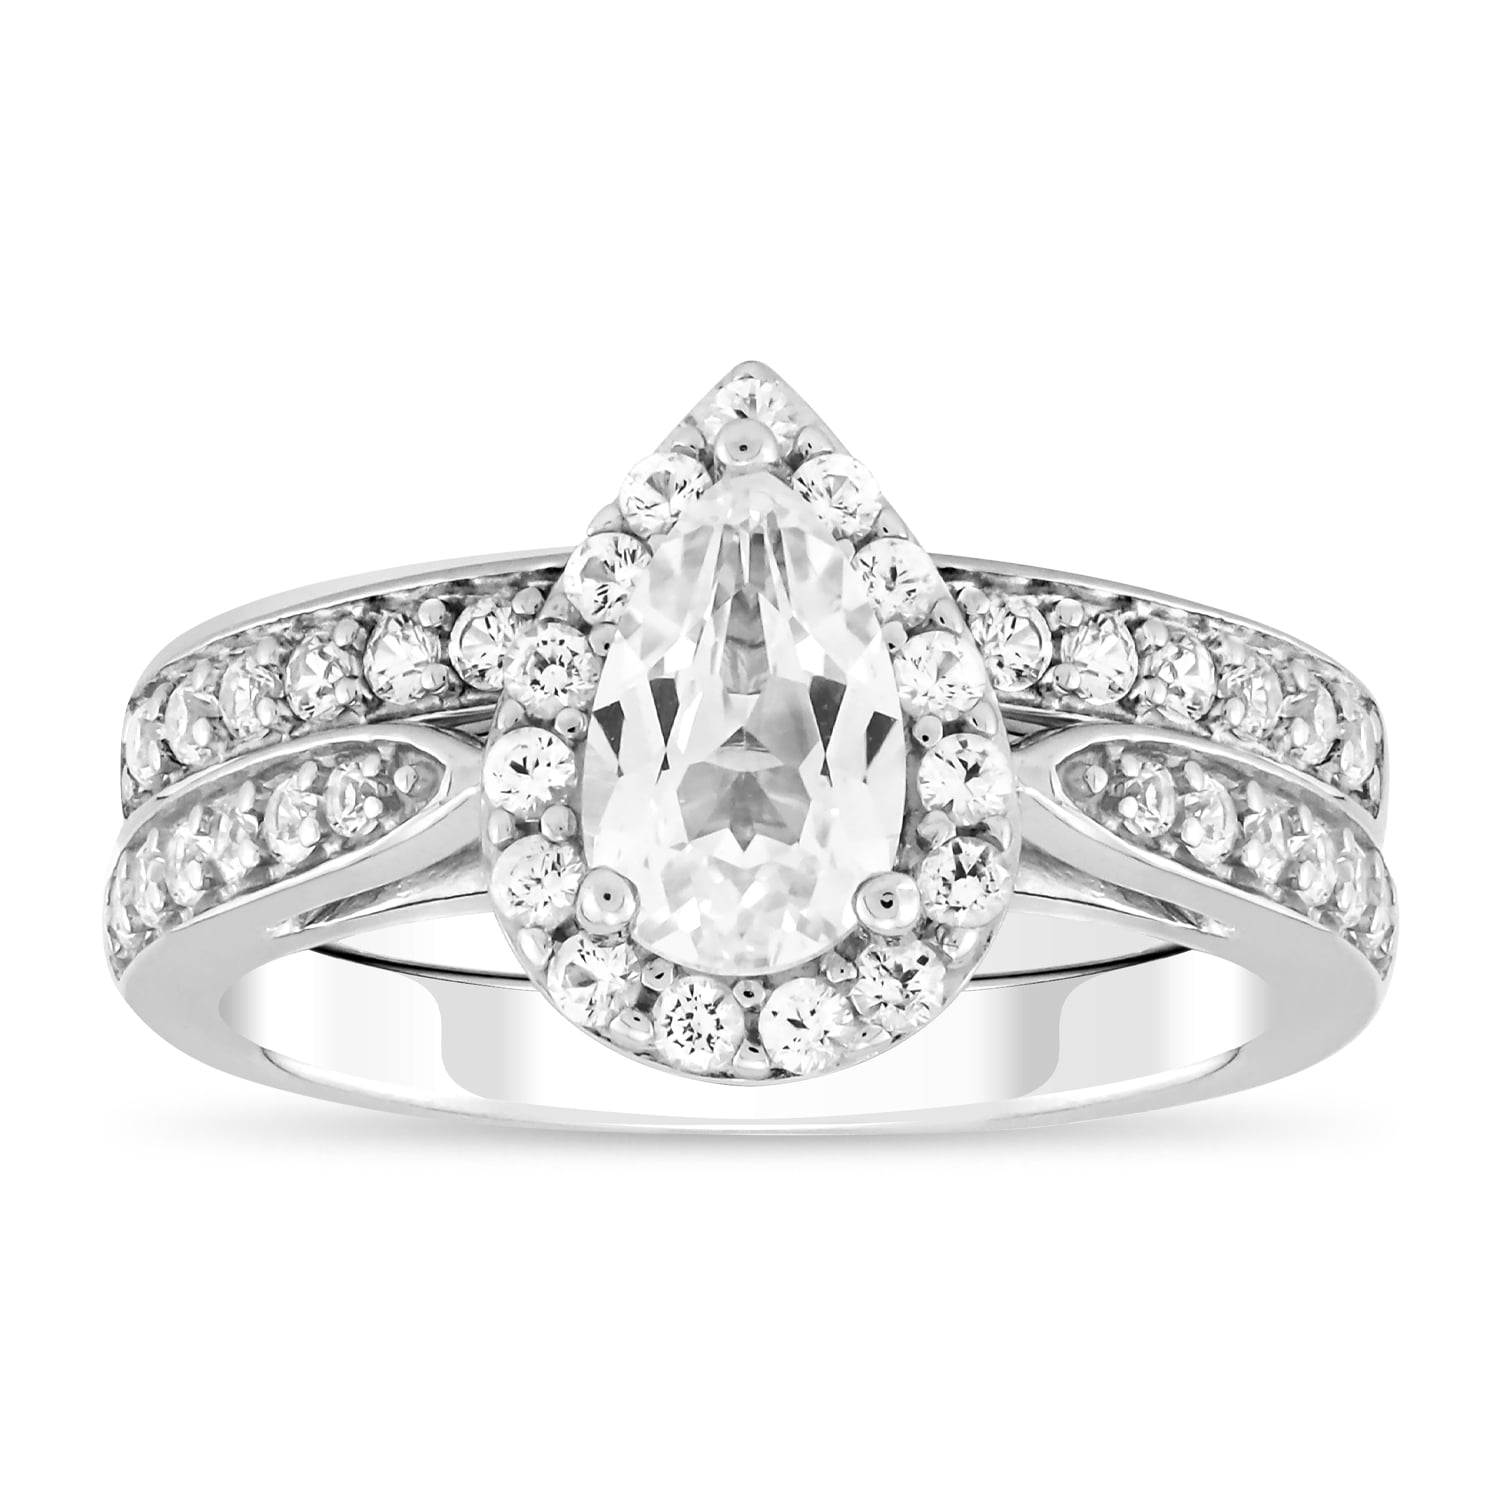 2.5Ct Lab Created Pink Diamond Bridal Set Engagement Ring White Gold Plated